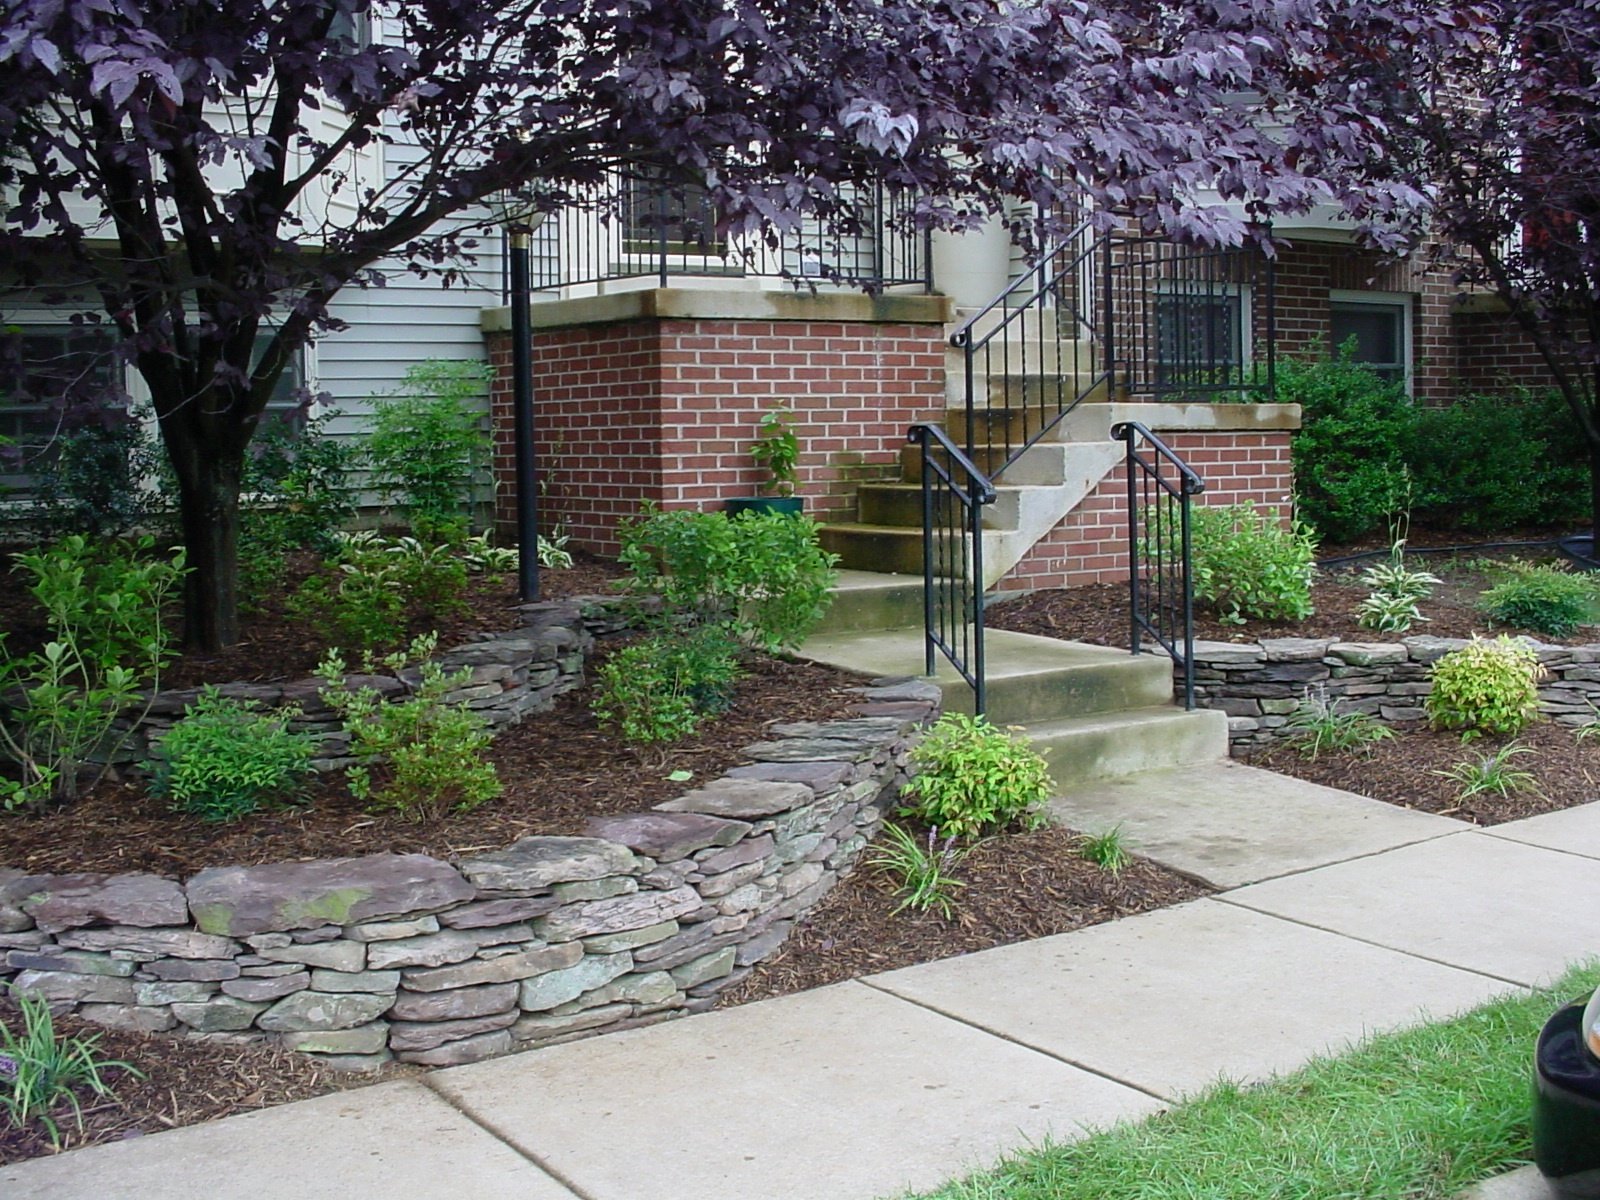 mulch and plantings in landscape beds at home entrance 